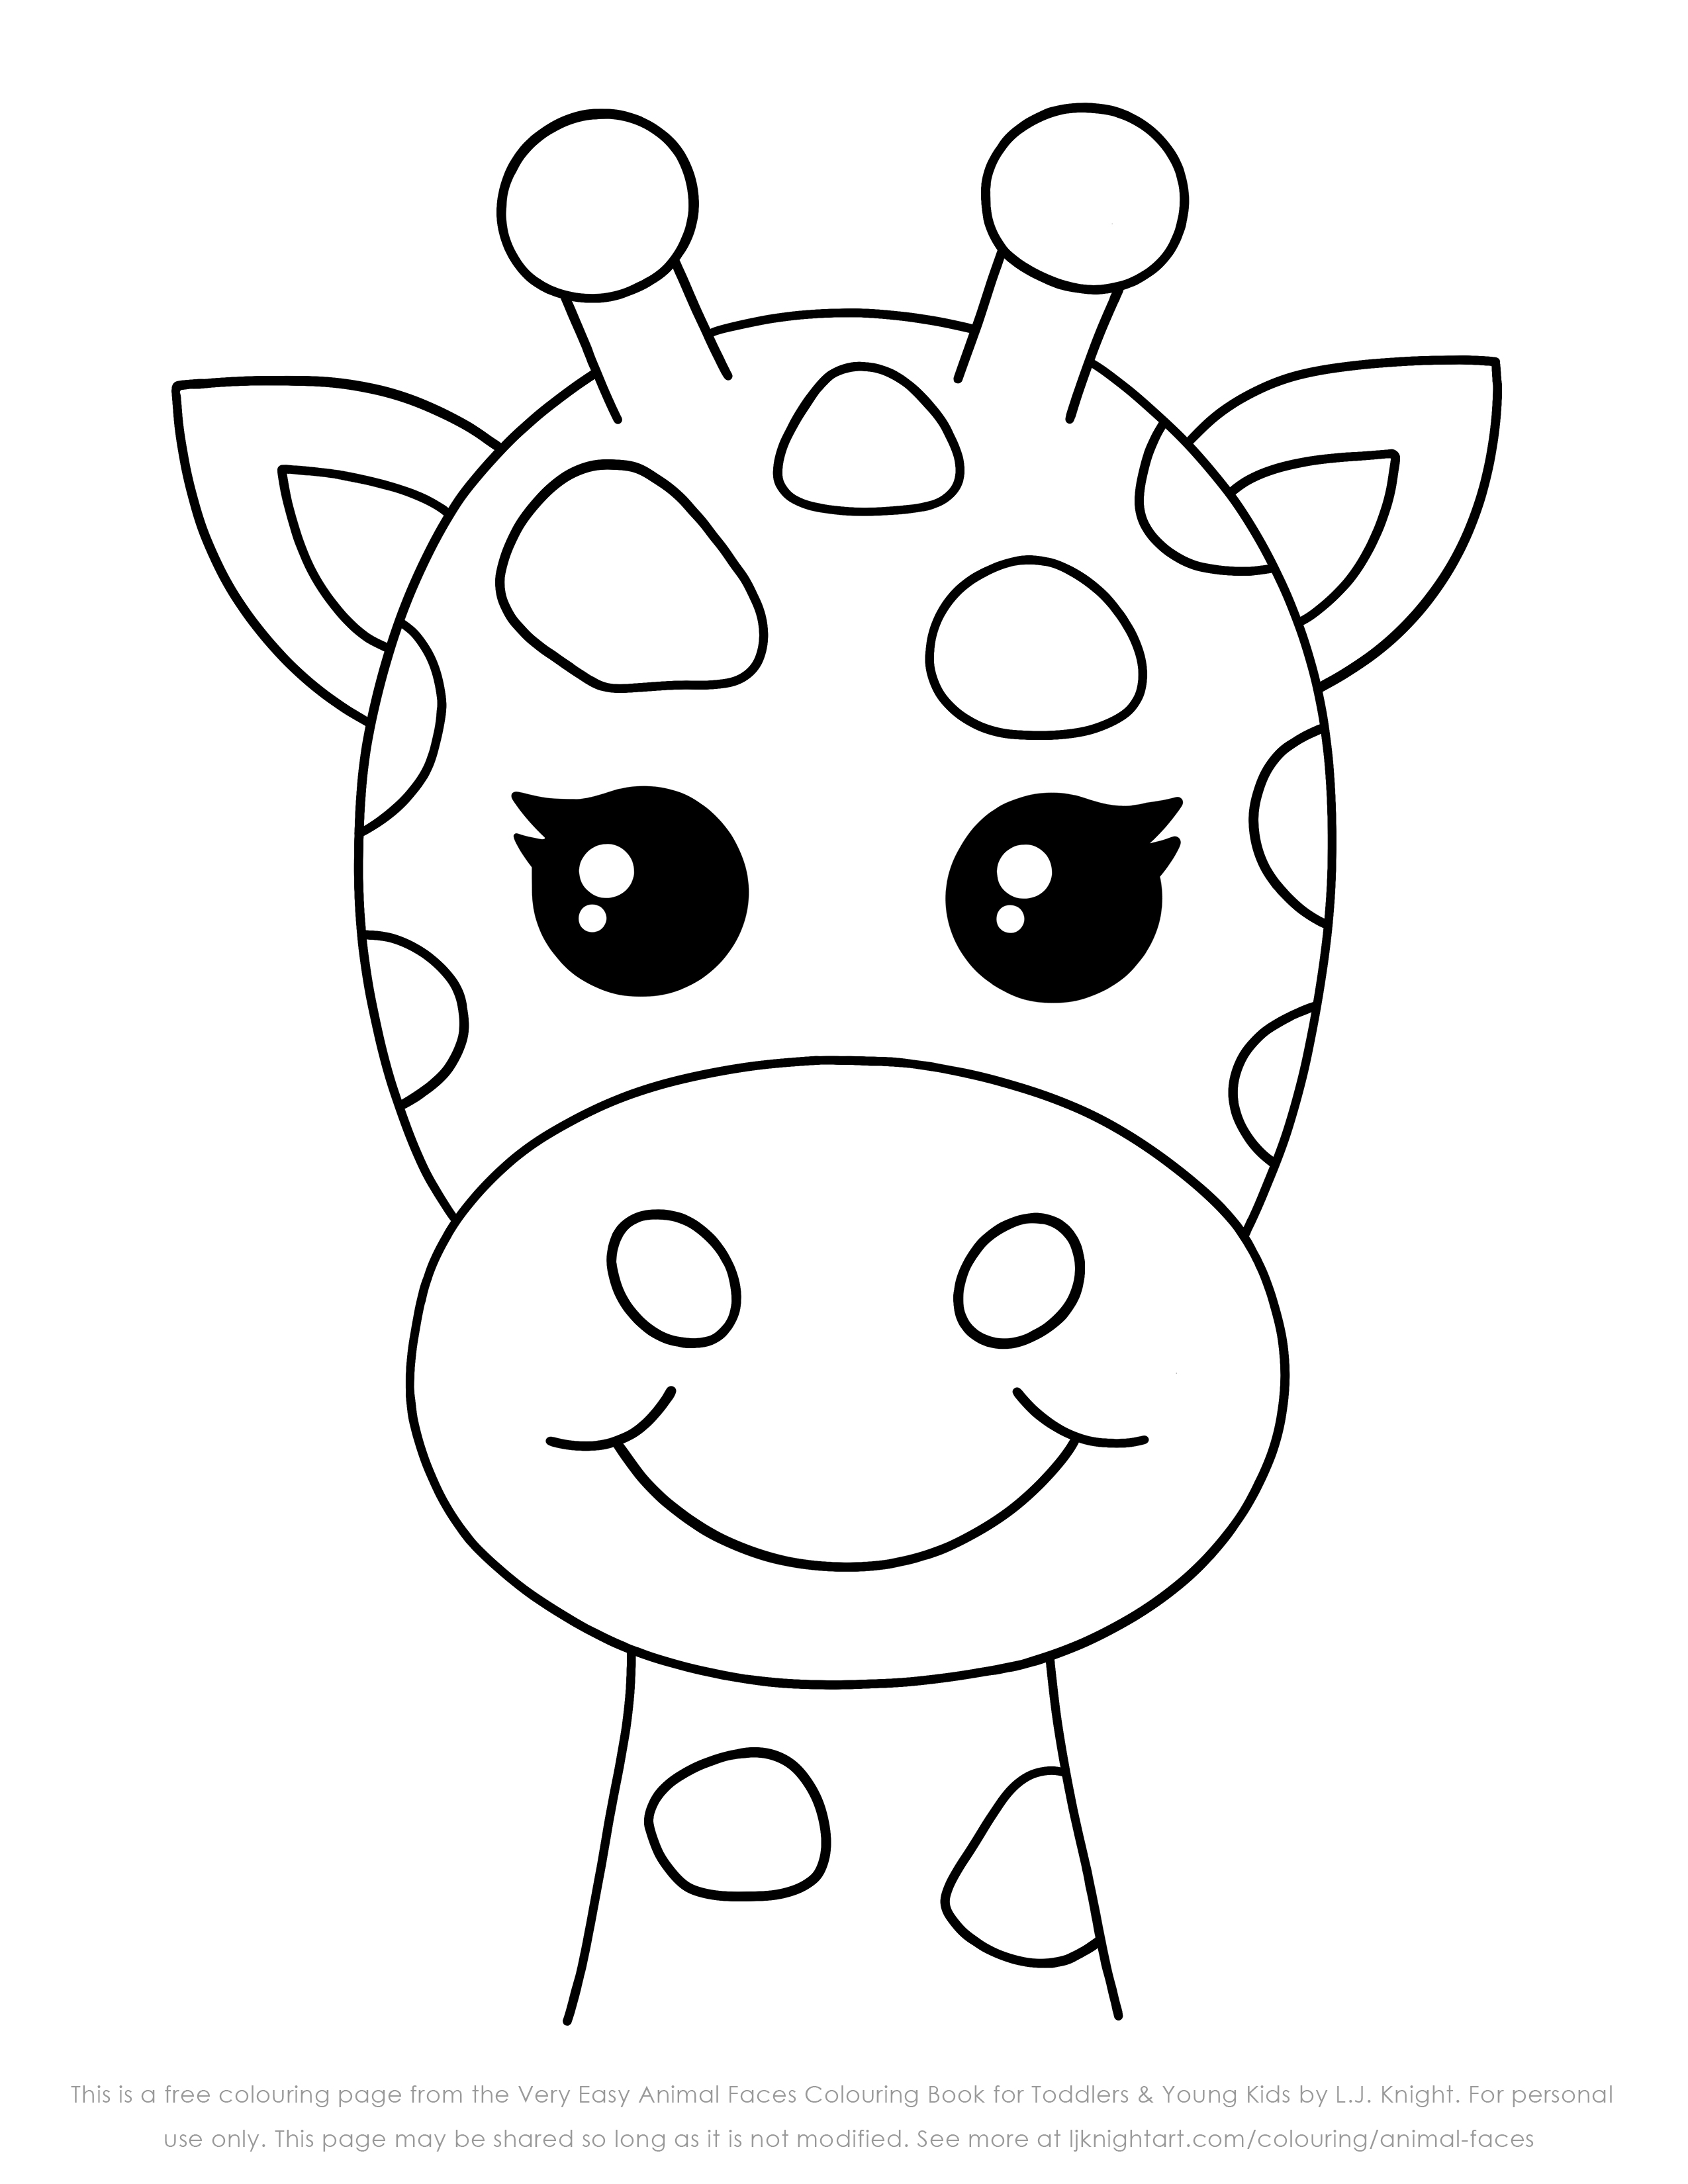 New – Very Easy Animal Faces Colouring Book   L.J. Knight